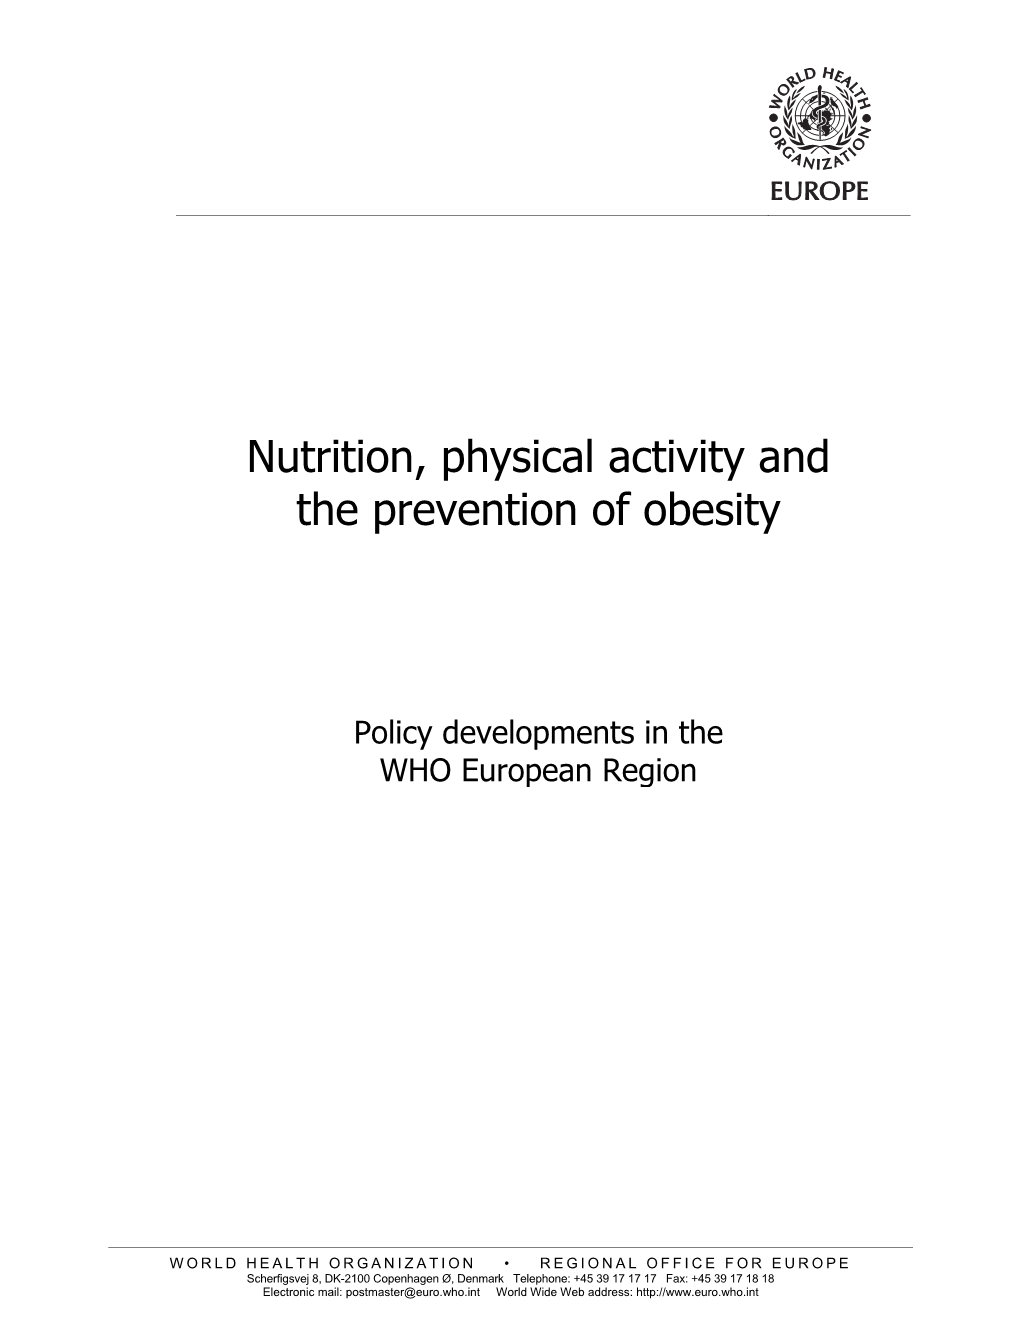 Nutrition, Physical Activity and the Prevention of Obesity